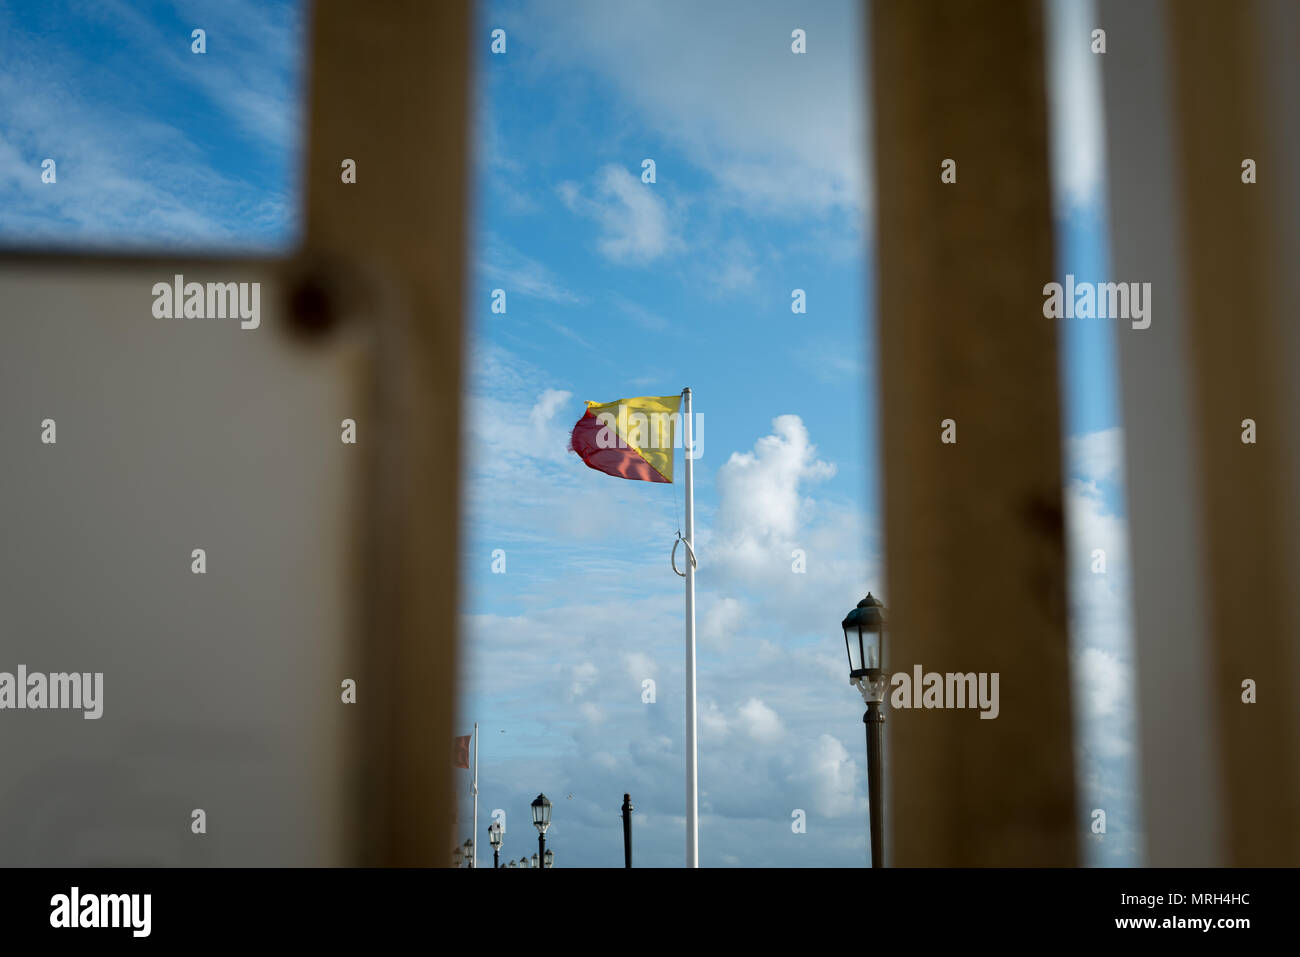 A safety flag fluttering in the wind on Worthing Pier, Worthing, West Sussex, England, UK. Stock Photo